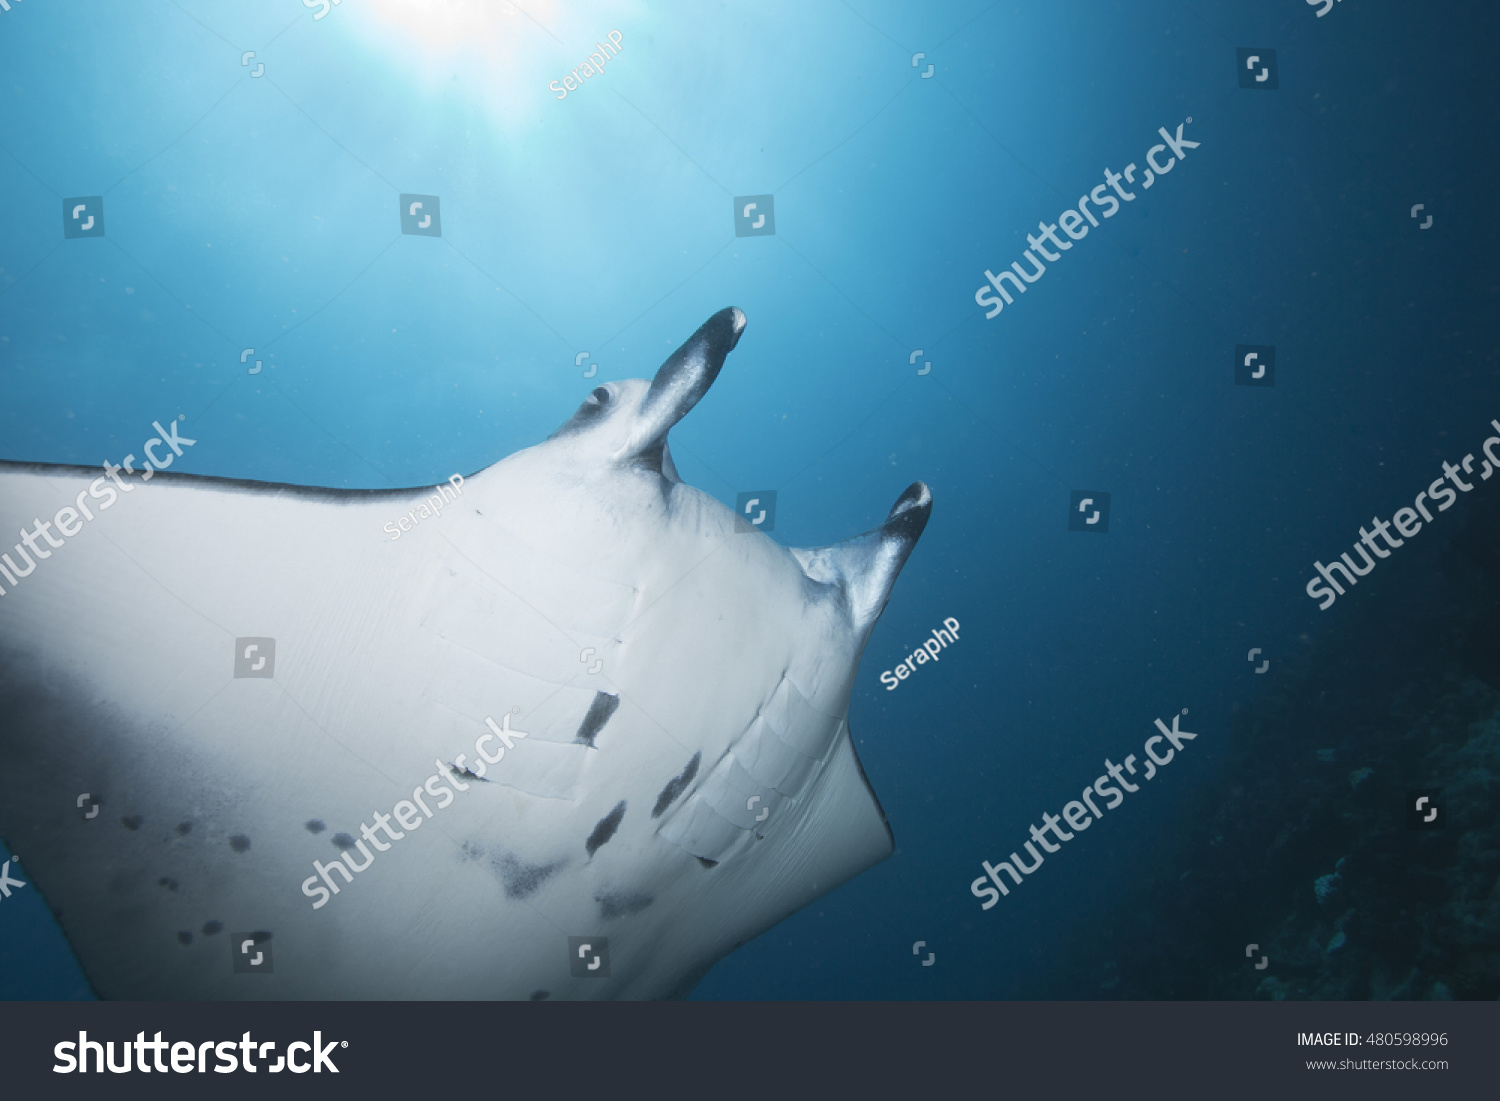 Portrait of an impressive Manta ray (Manta birostris) at a tropical offshore coral reef cleaning station, in the popular holiday destination of the Maldives Islands #480598996